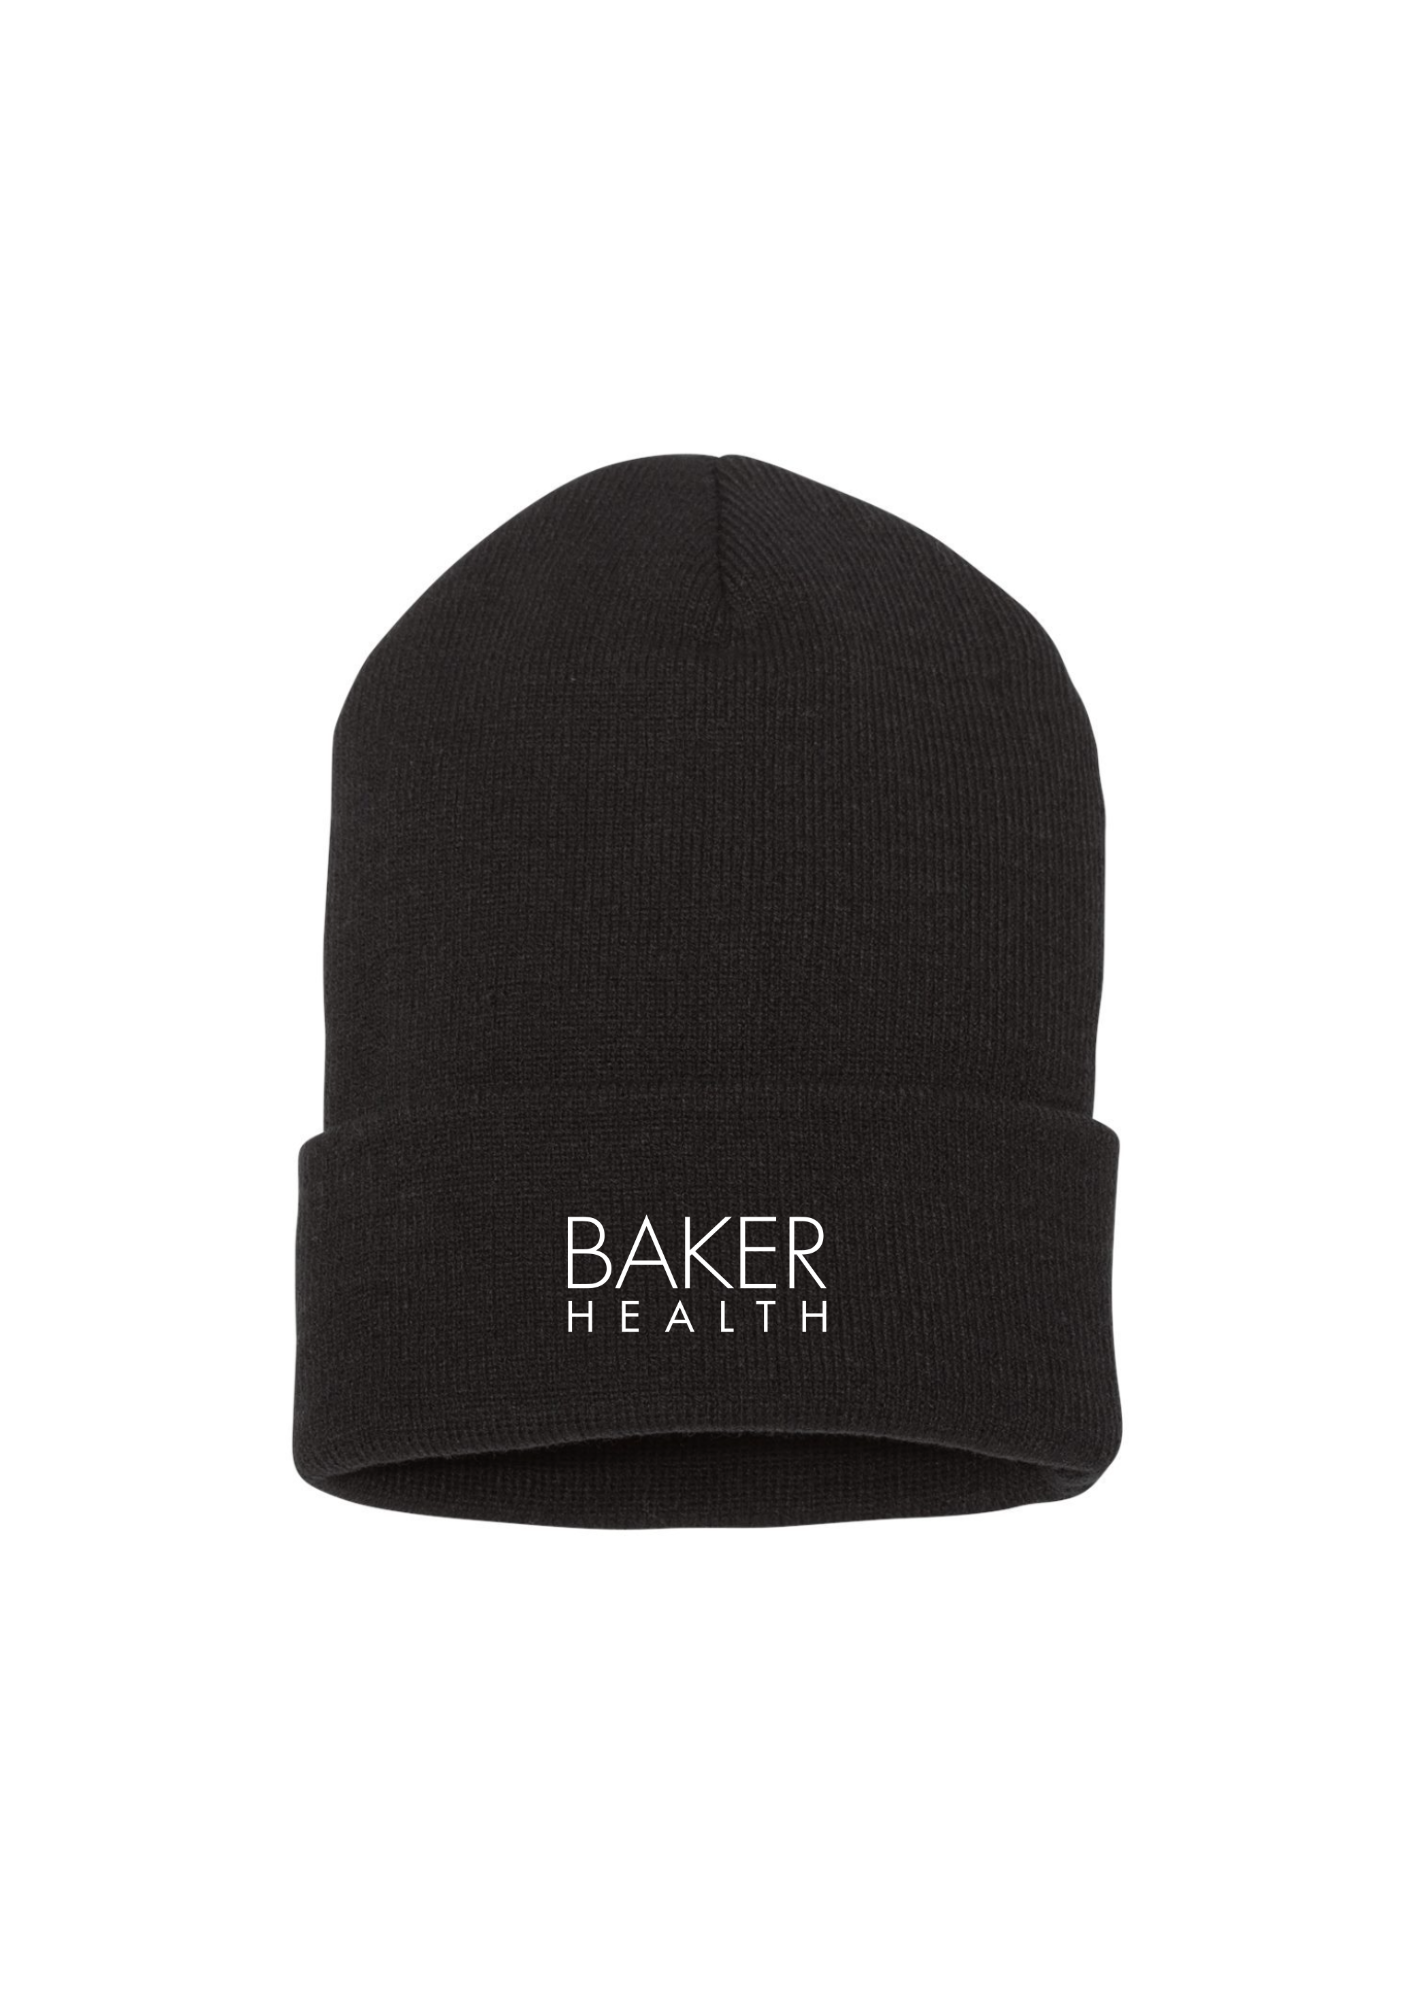 Baker Health Embroidered Cuffed Beanie Hat